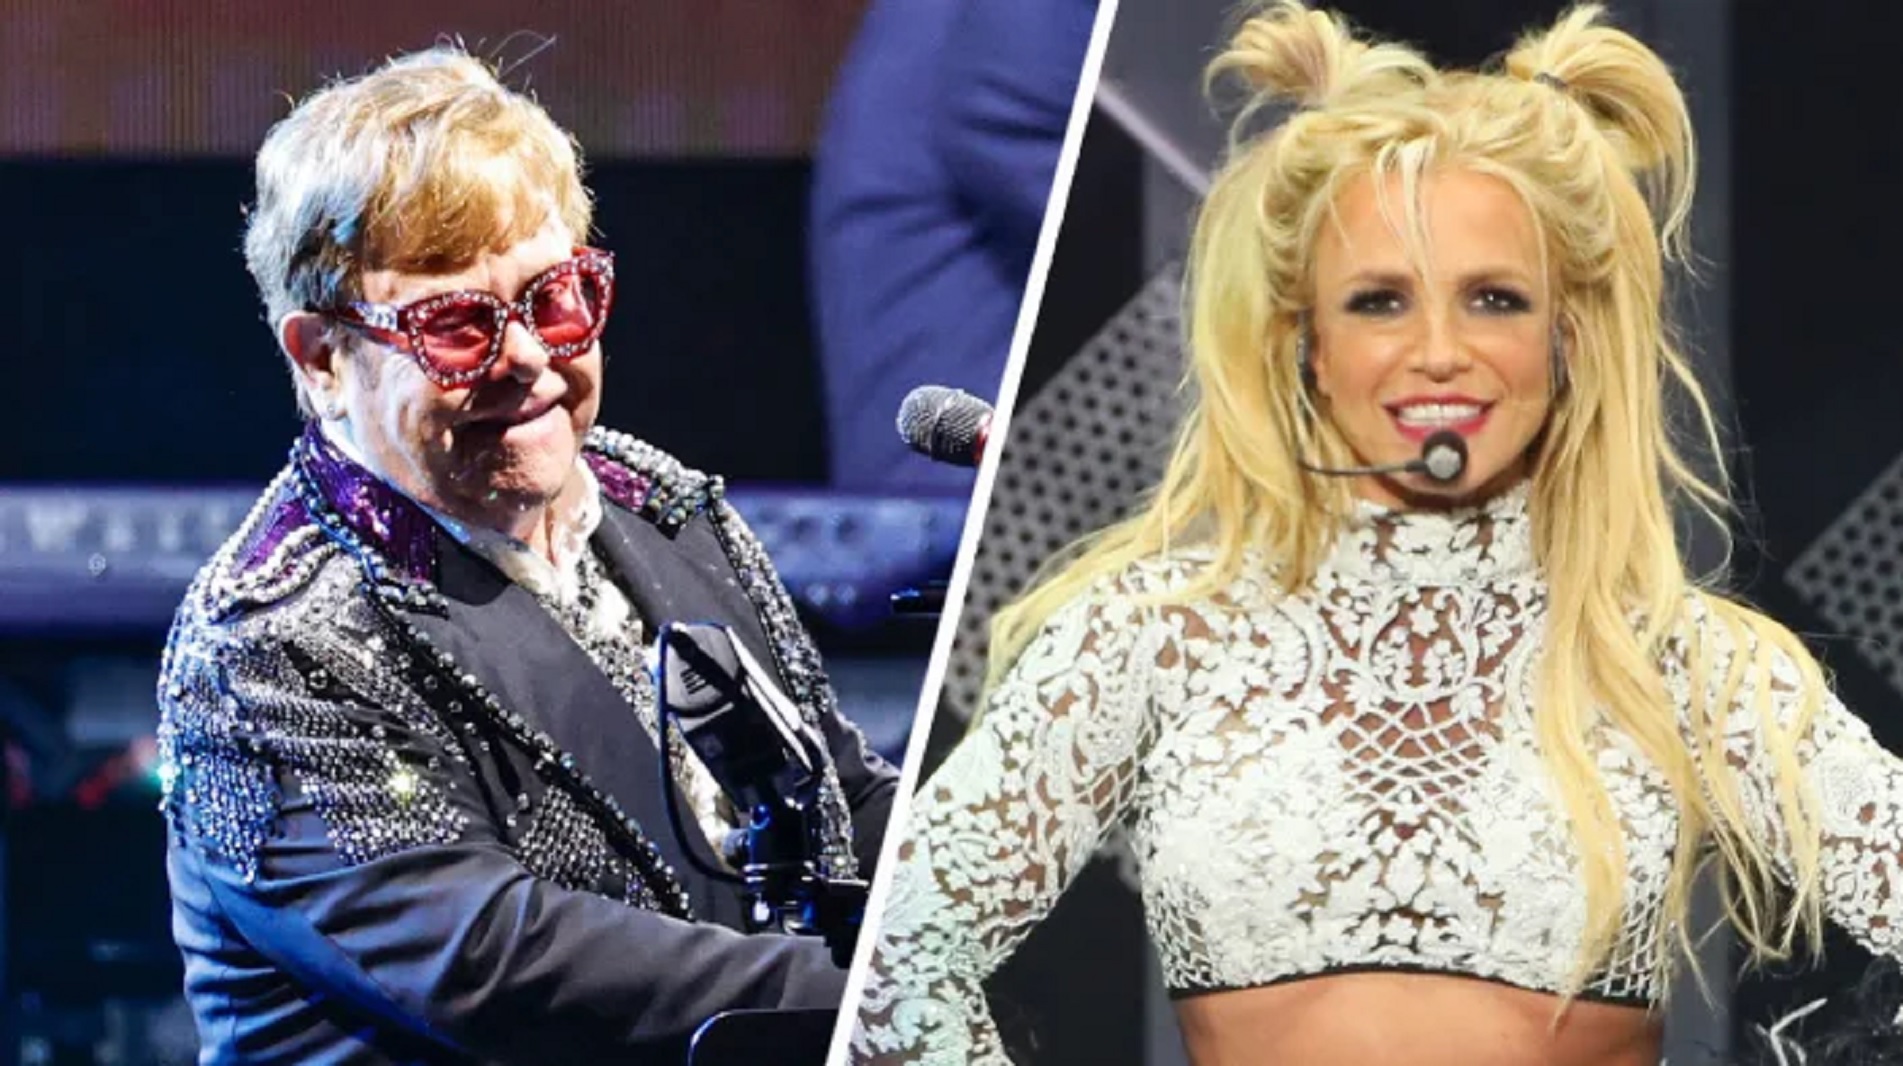 Listen To The First Snippet Of Elton John’s New Duet With Britney Spears, As He Gives Impromptu Performance Of The New Duet